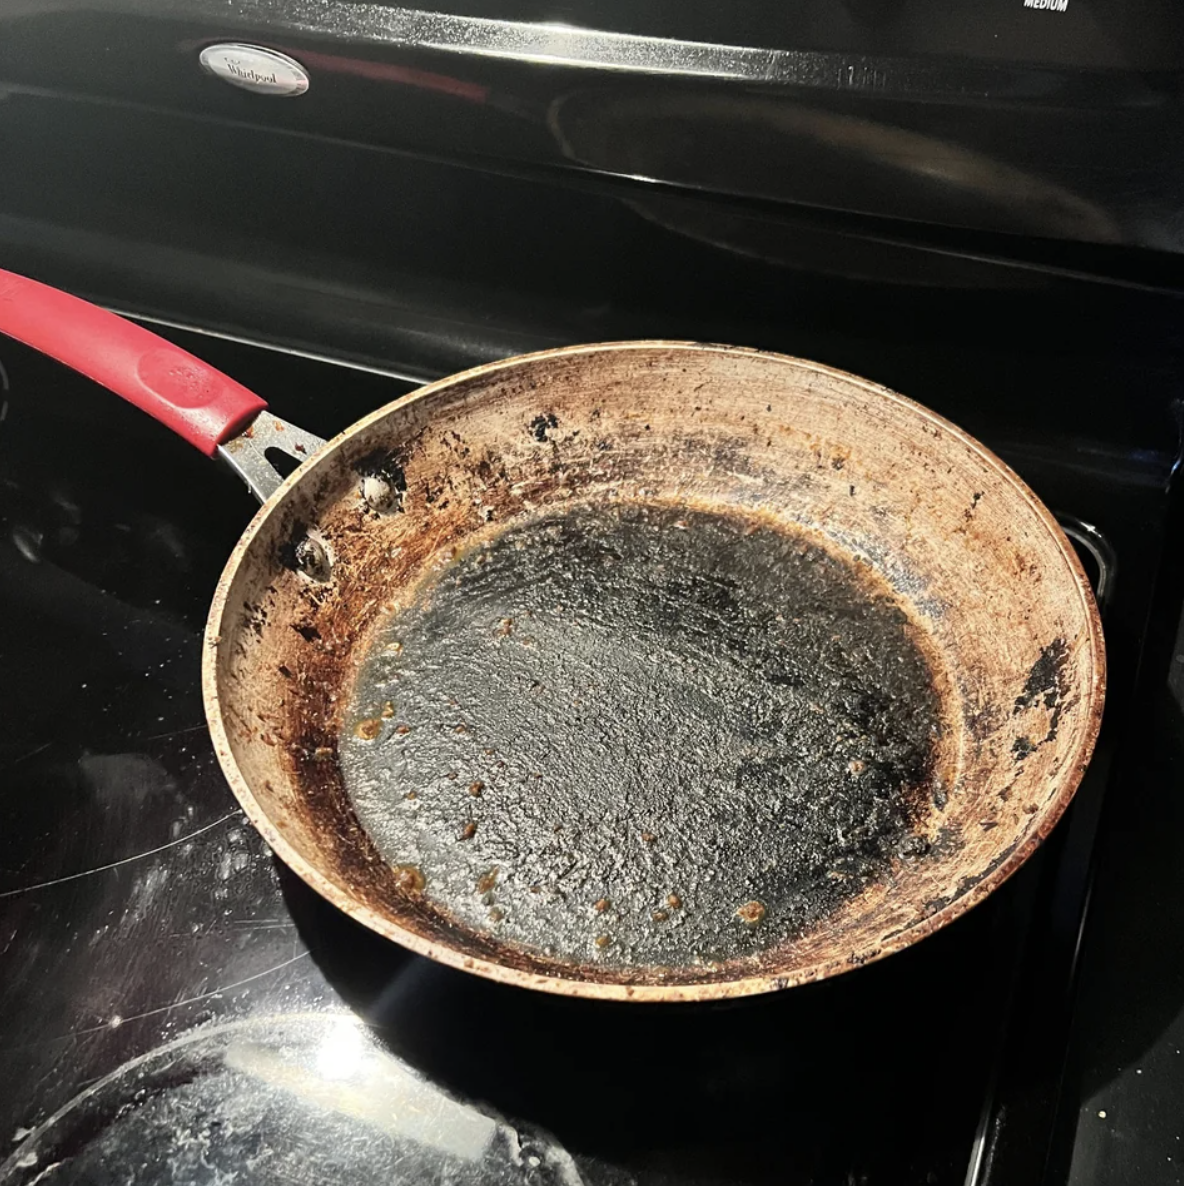 The pan on the stove is very dirty, covered with layers of grime